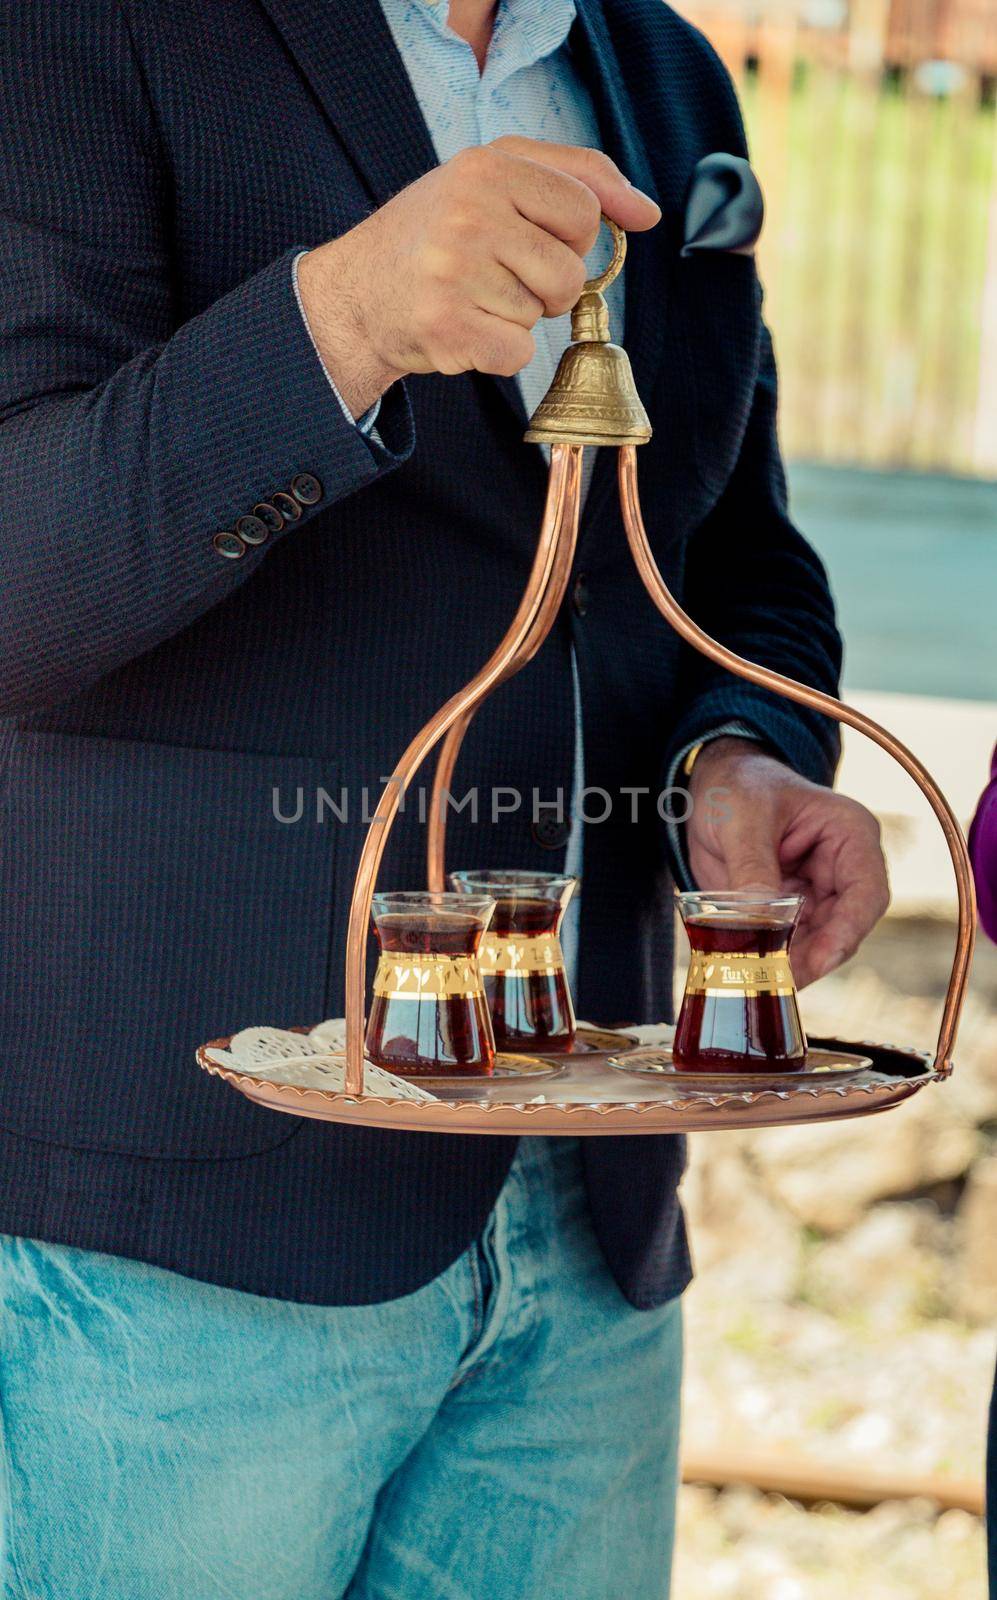 Turkish tea is served in traditional glass